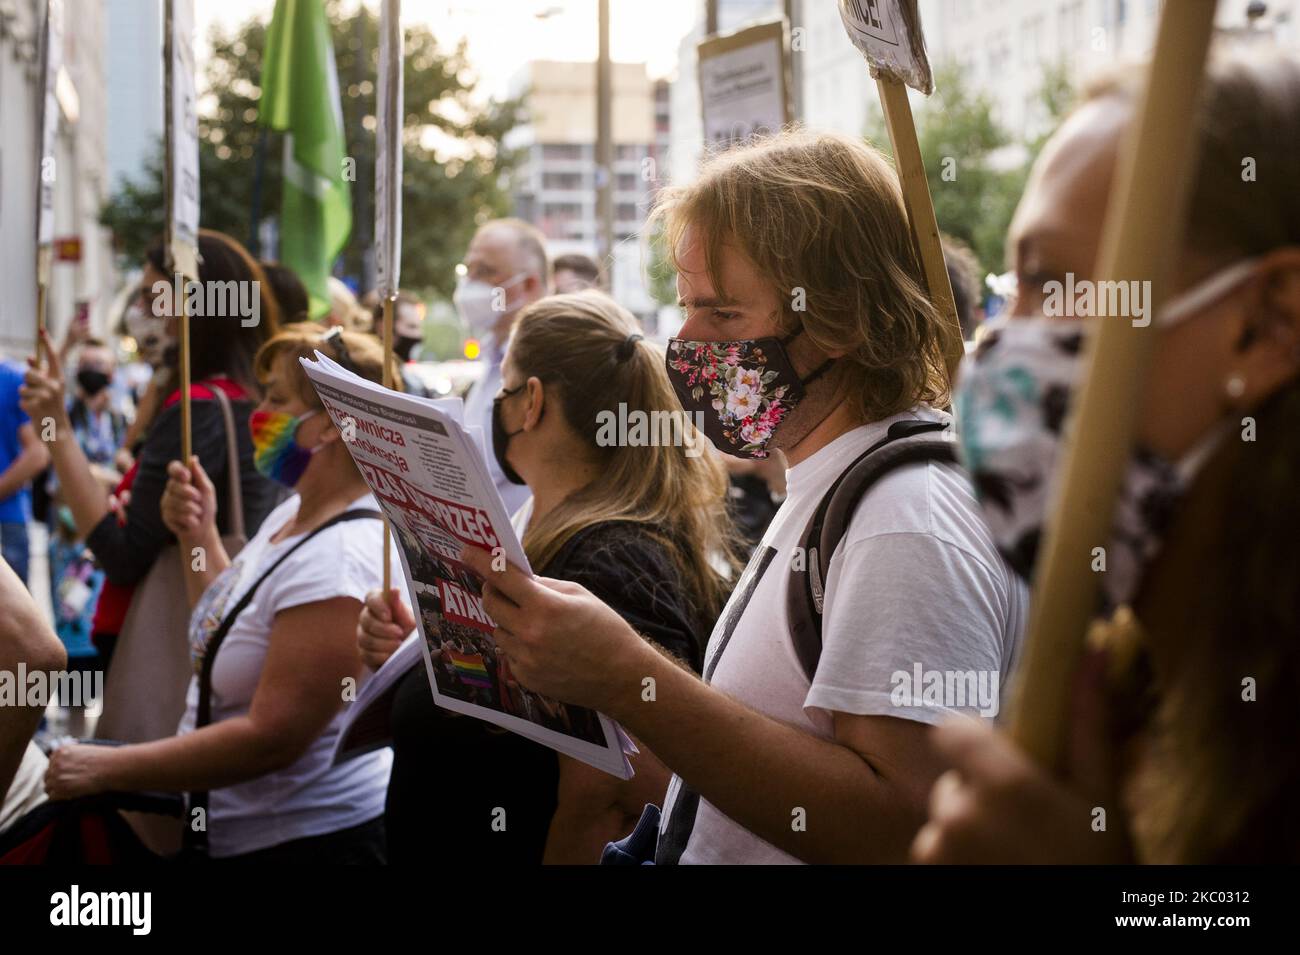 After Moria refugee camp burned to the ground in Greece, a group of pro-refugee and anti-rascism activists and their supporters gathered in Warsaw, Poland, on September 16, 2020 to show solidarity with Moria refugees.(Photo by Piotr Lapinski/NurPhoto) Stock Photo